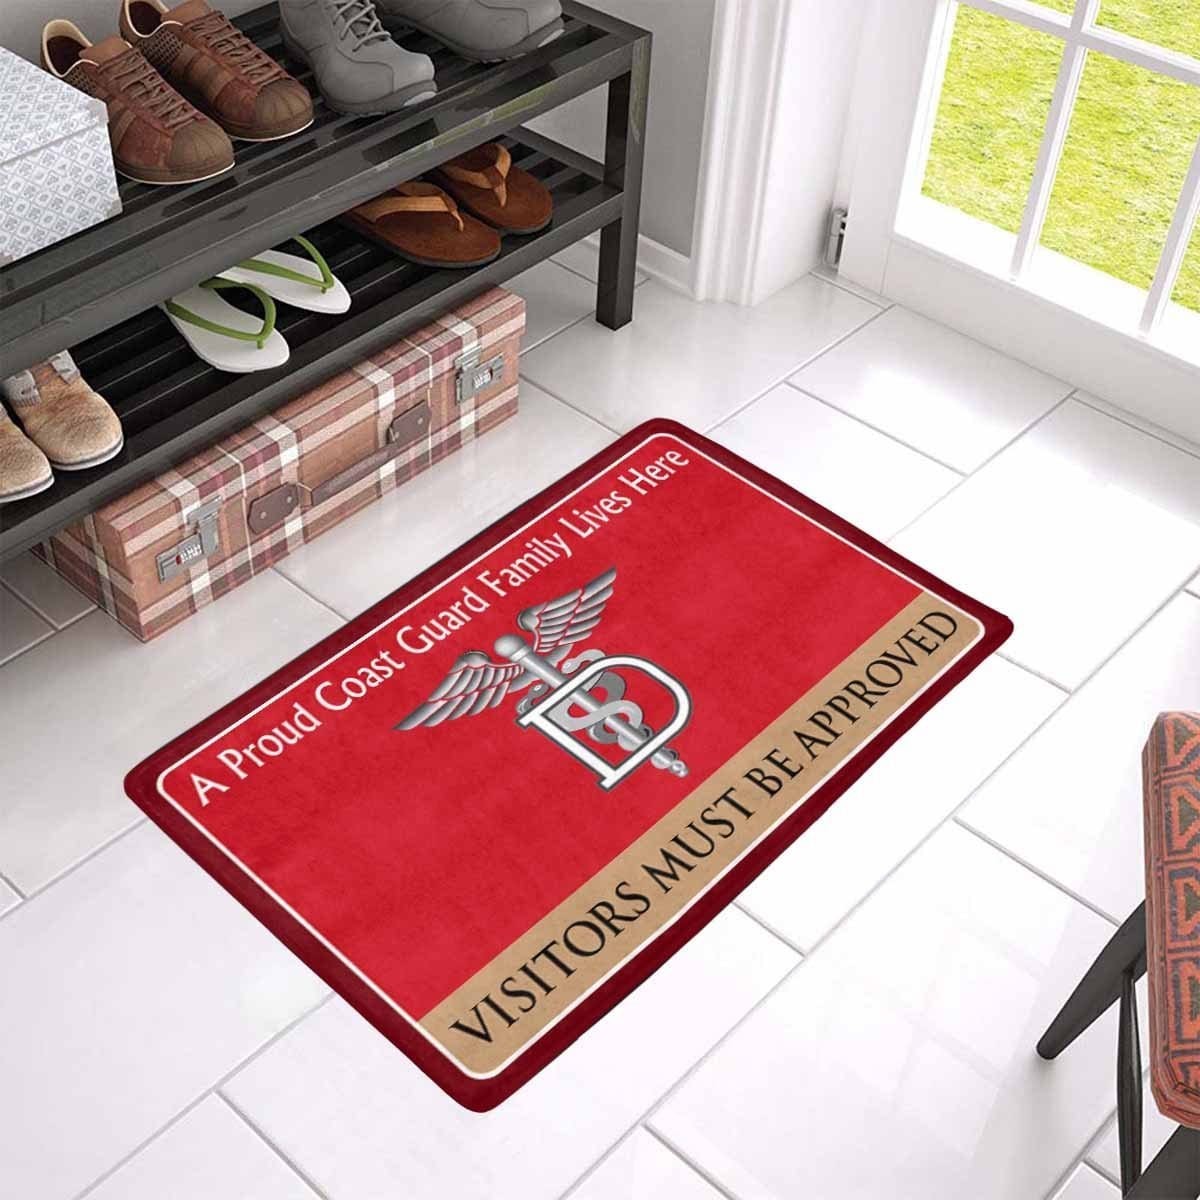 US Coast Guard Dental Technician DT Logo Family Doormat - Visitors must be approved (23.6 inches x 15.7 inches)-Doormat-USCG-Rate-Veterans Nation